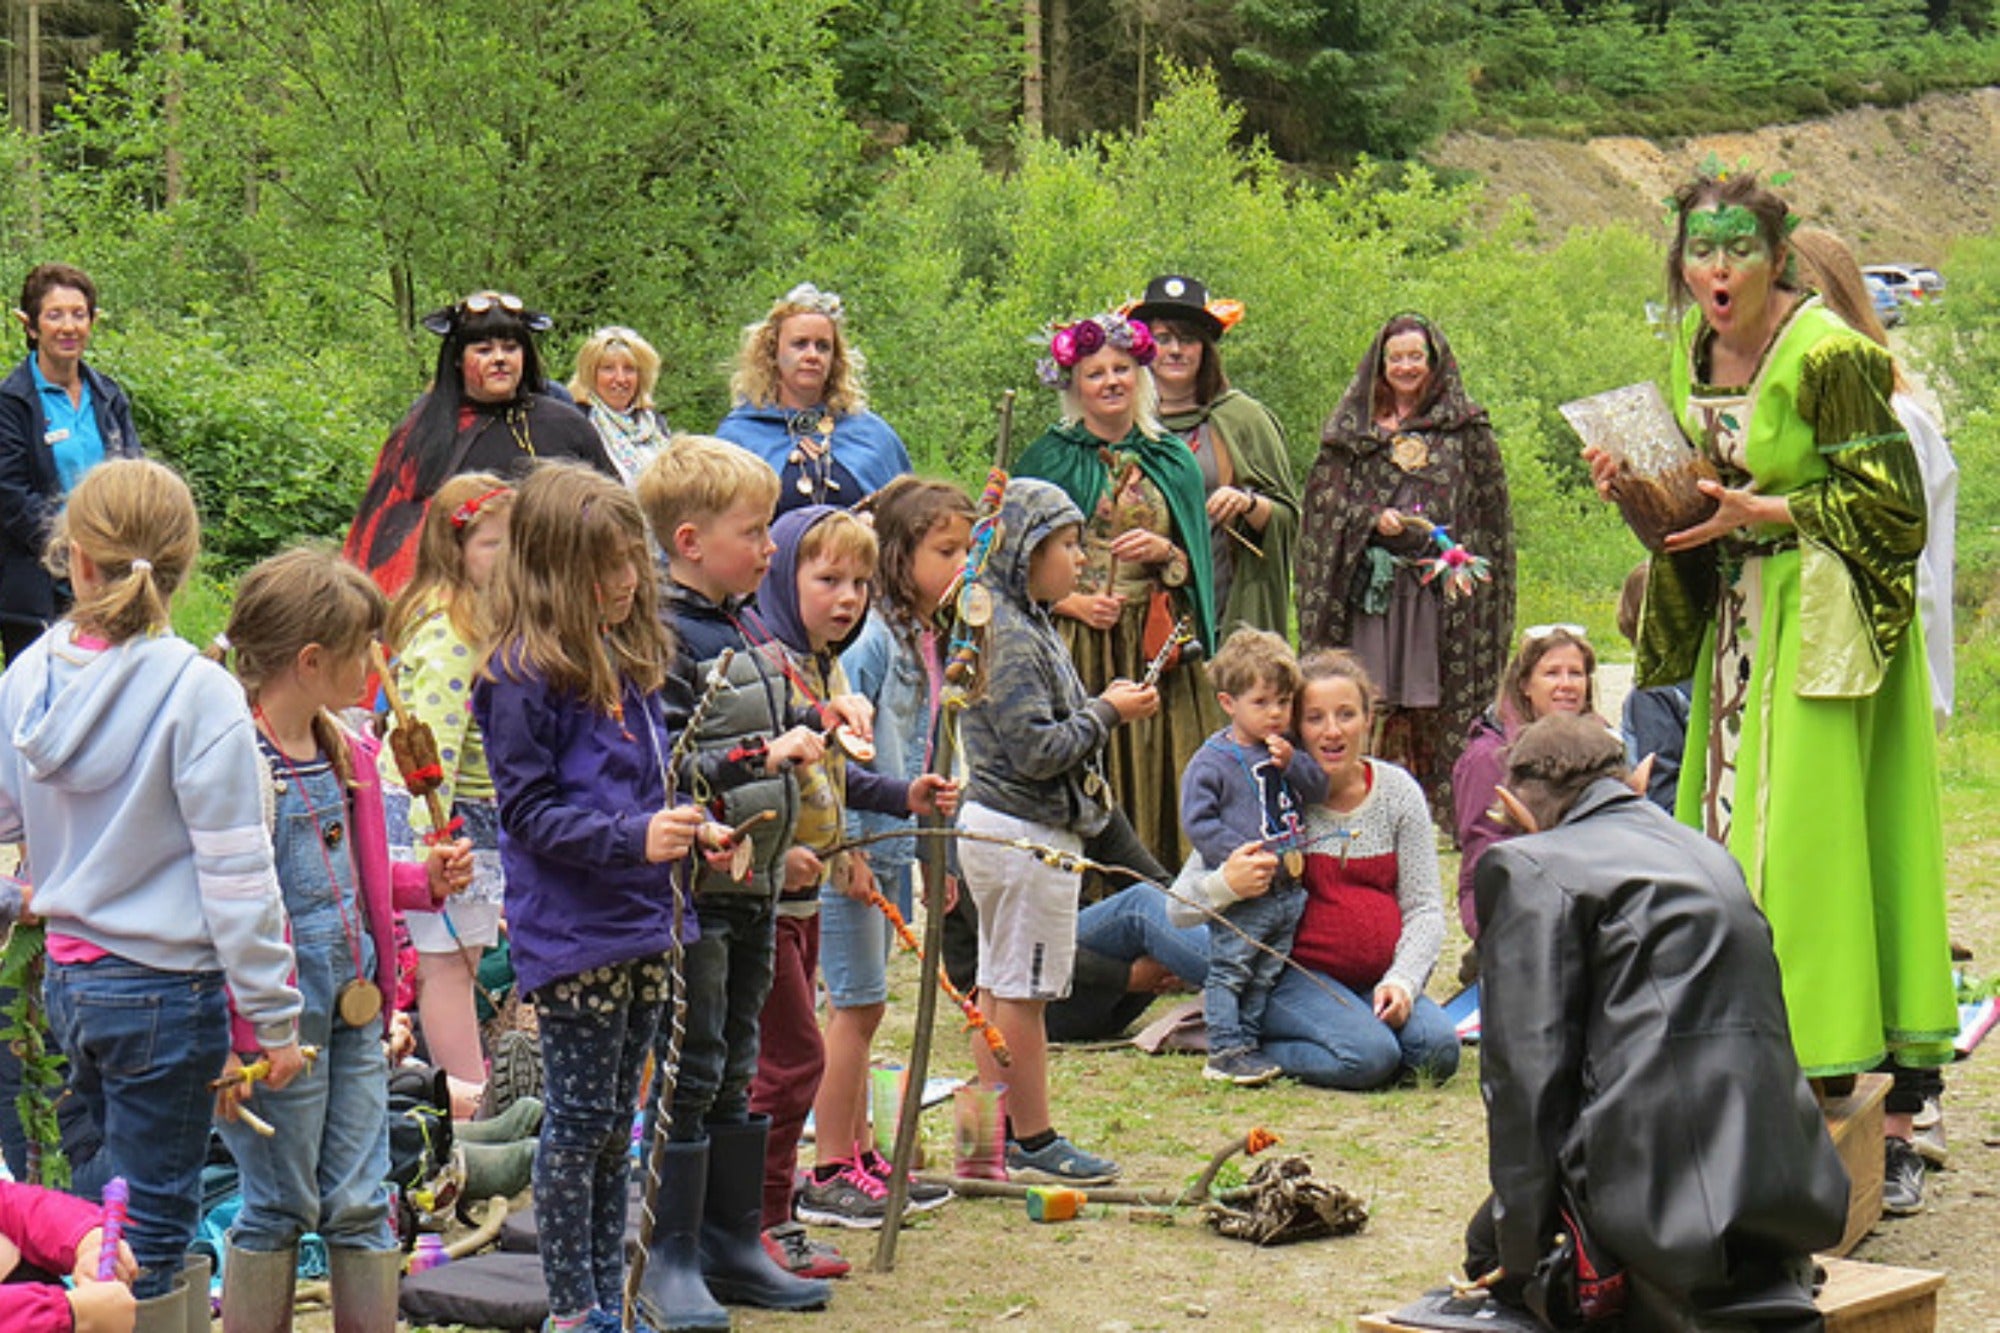 Real Life: Storytelling, Sustainability And Outdoor Crafts At MythFest